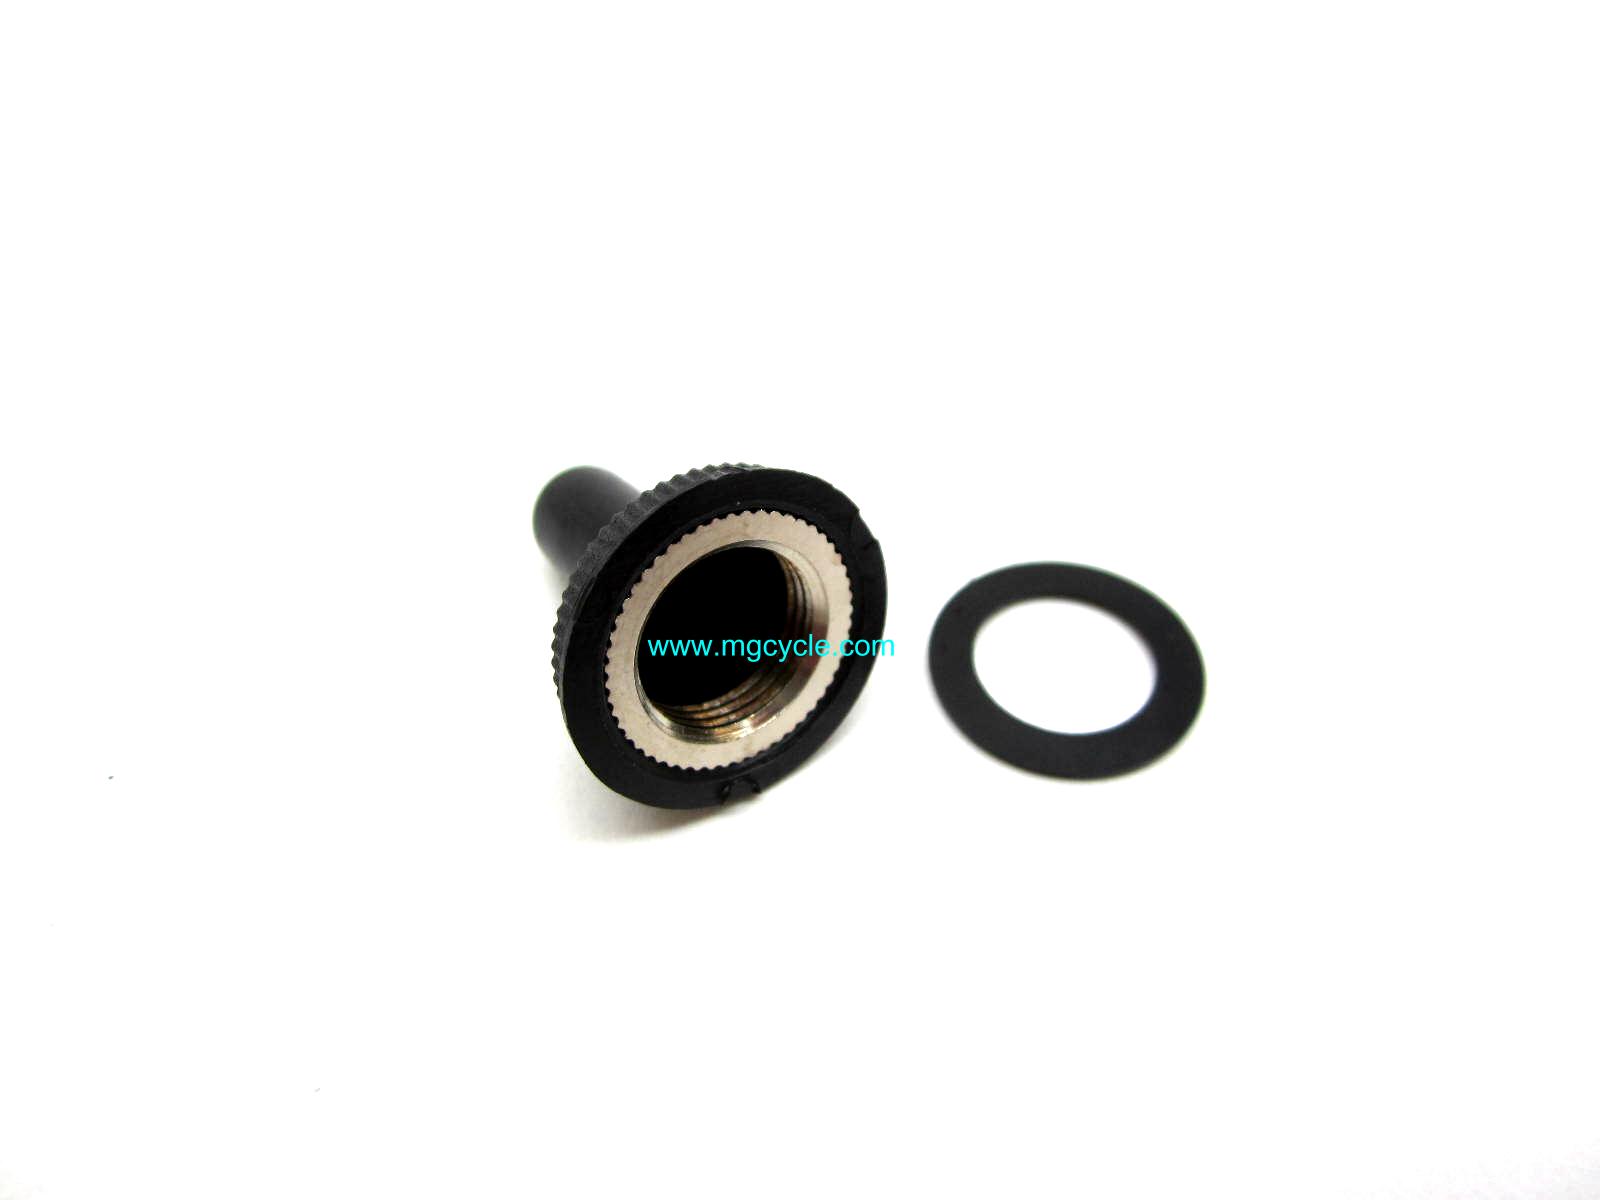 Rubber cap for toggle switch, Convert, G5, T3 Police instrument